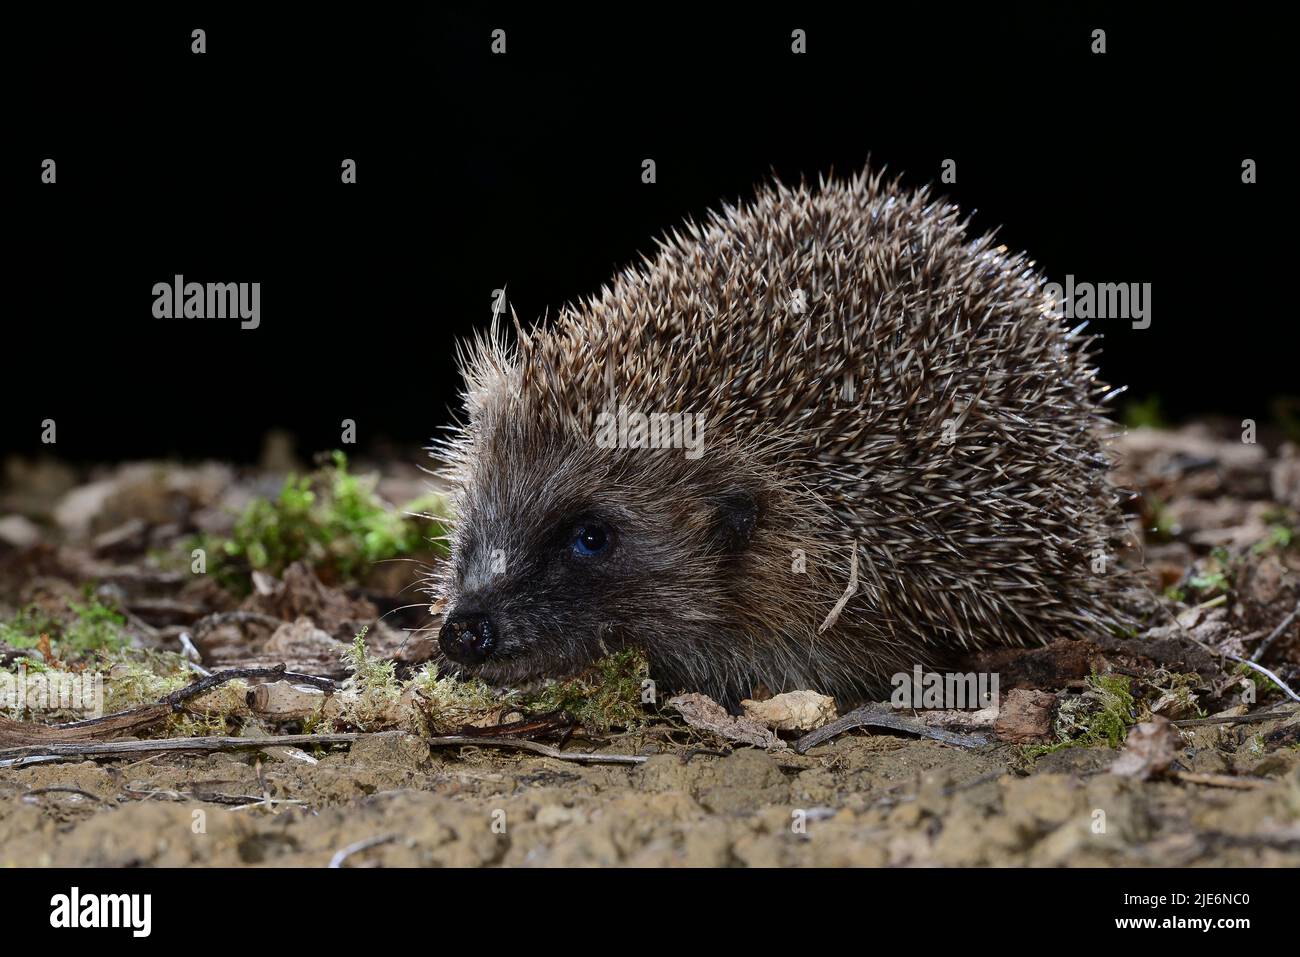 Hedgehog foraging on rough ground at night in Dorset, UK Stock Photo